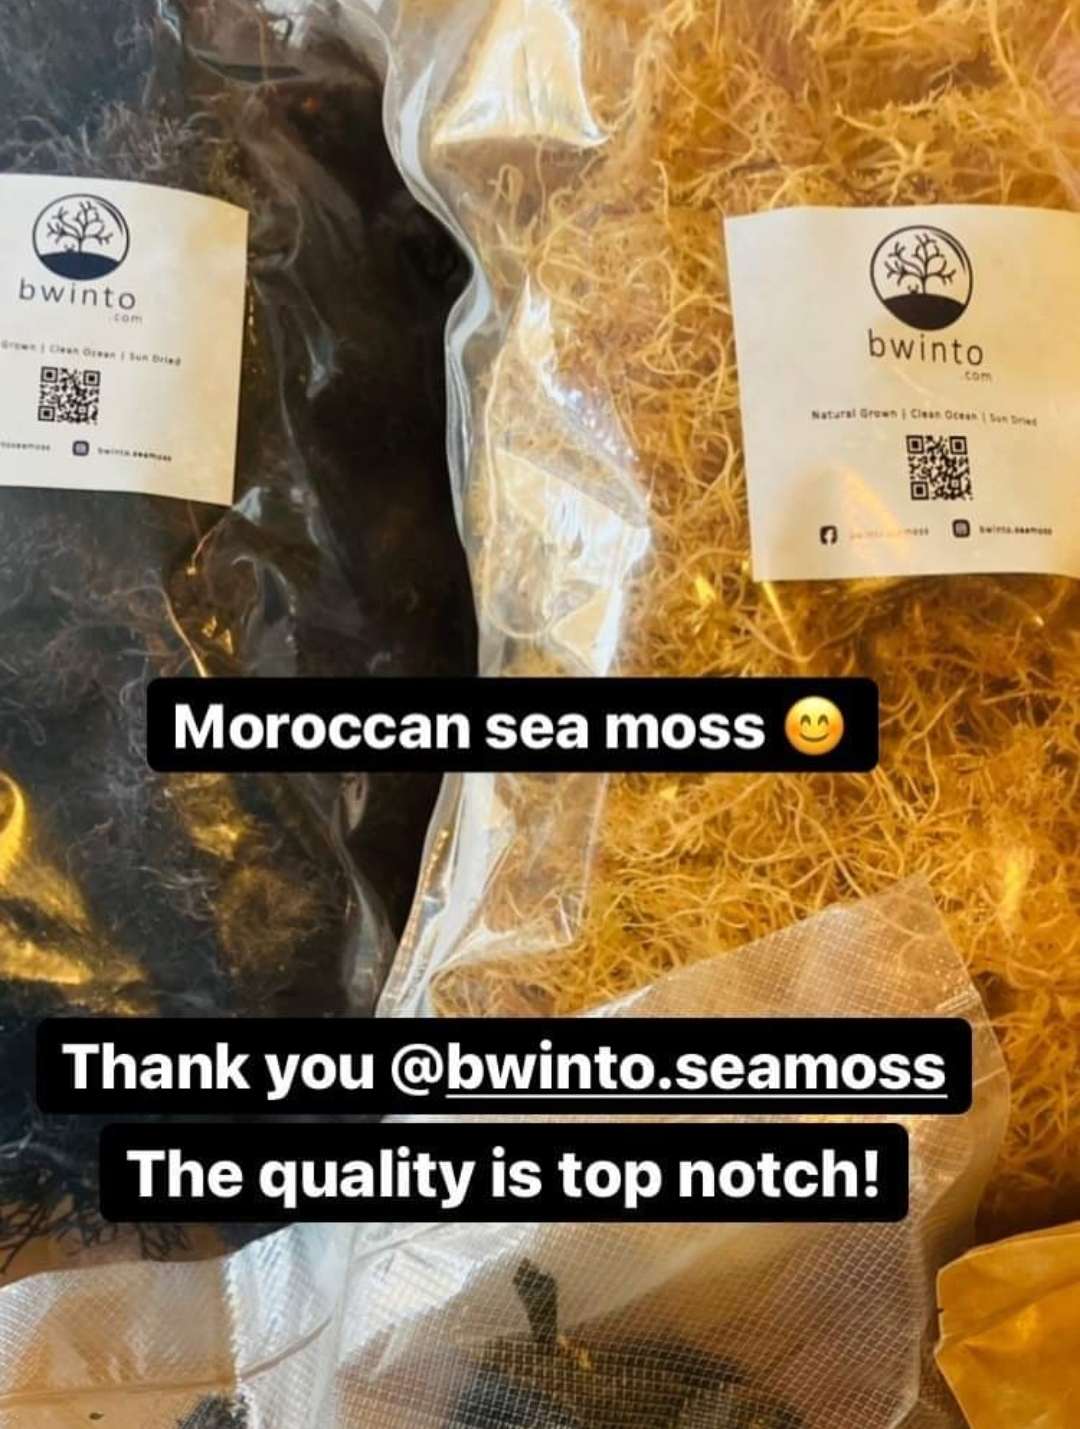 real-natural-grown-sea-moss-review-feedback-bwinto-seamoss-moroccan-sea-moss-gel-0124